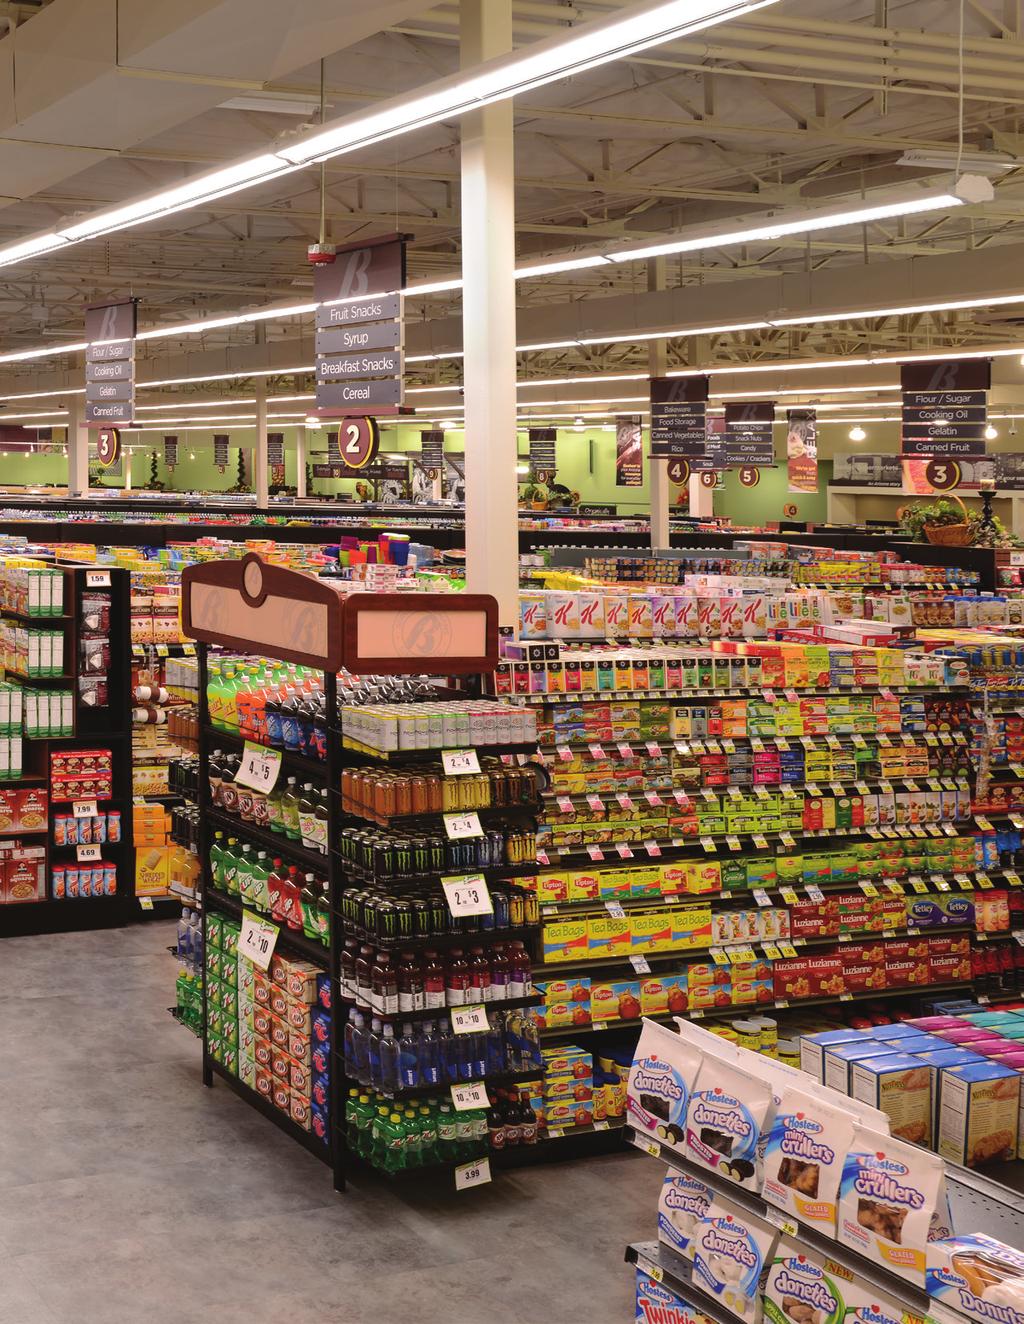 Grocery Application Guide Grocery Stores ENHANCE YOUR STORE LIGHTING TO TURN BROWSERS INTO BUYERS Selling groceries is about more than just stocking the products your customers are looking for.